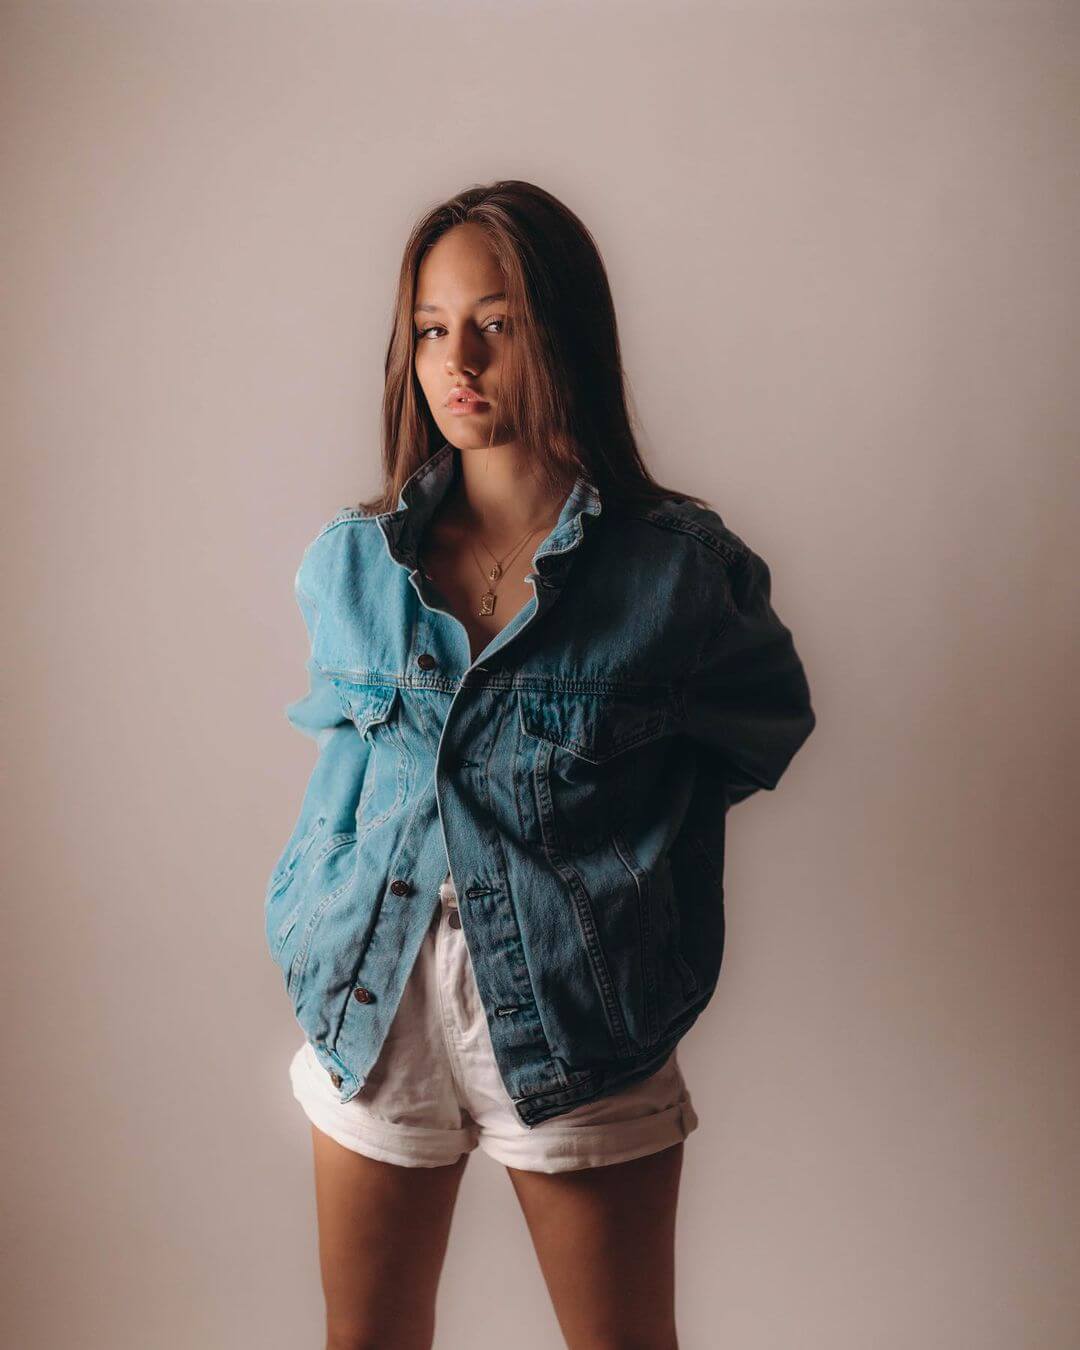 Makayla Storms In Denim Shirt With Shorts